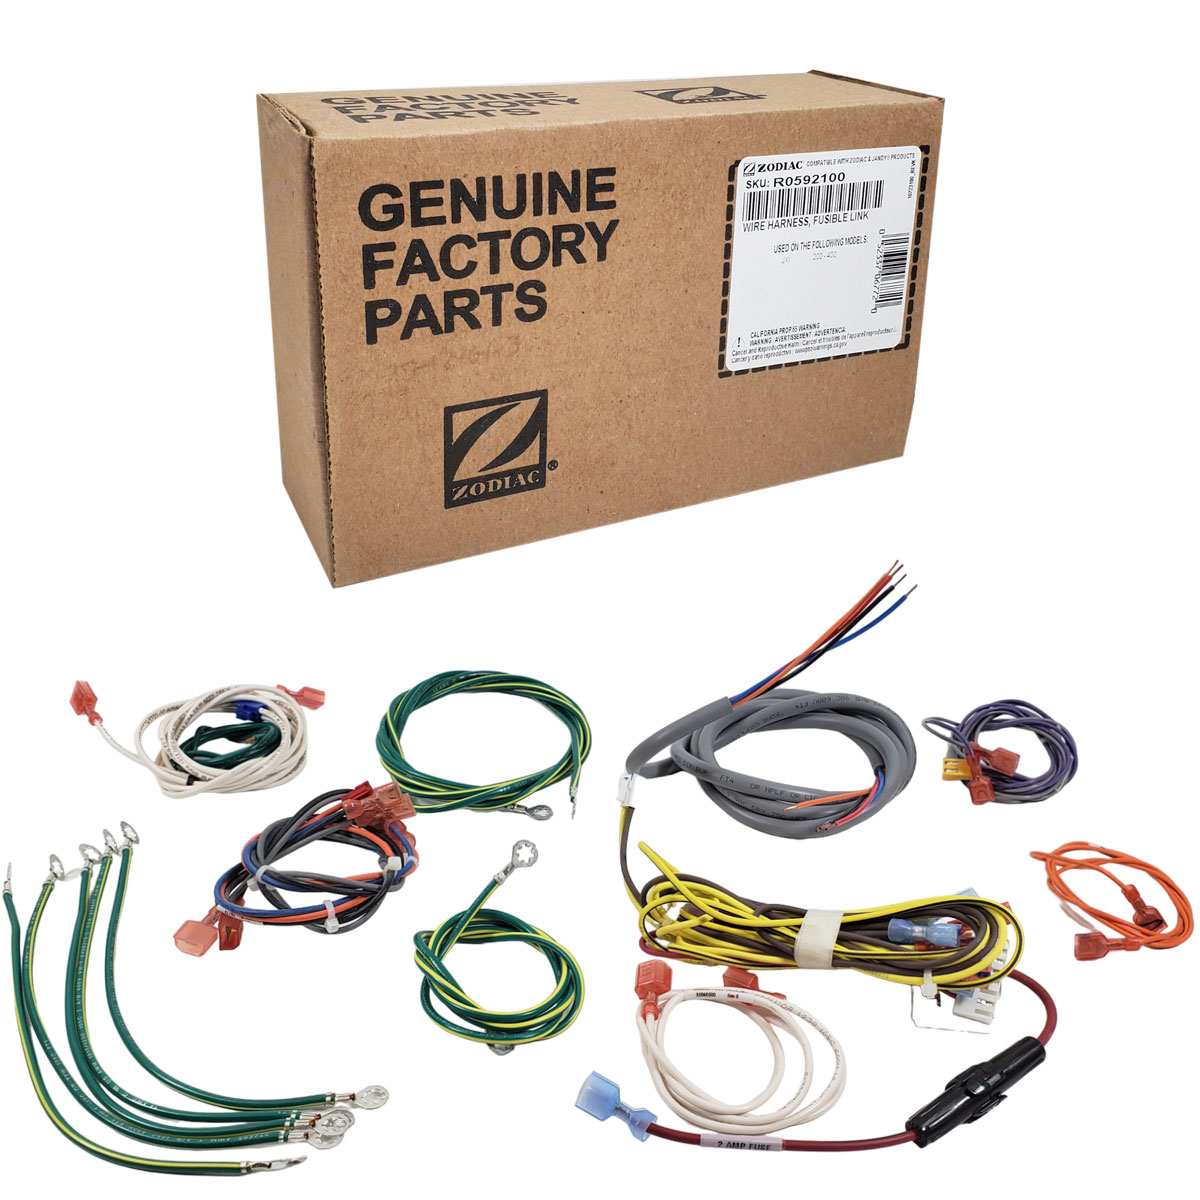 R0592100 Zodiac Jandy JXi Heater Wiring Harness and Fusible link